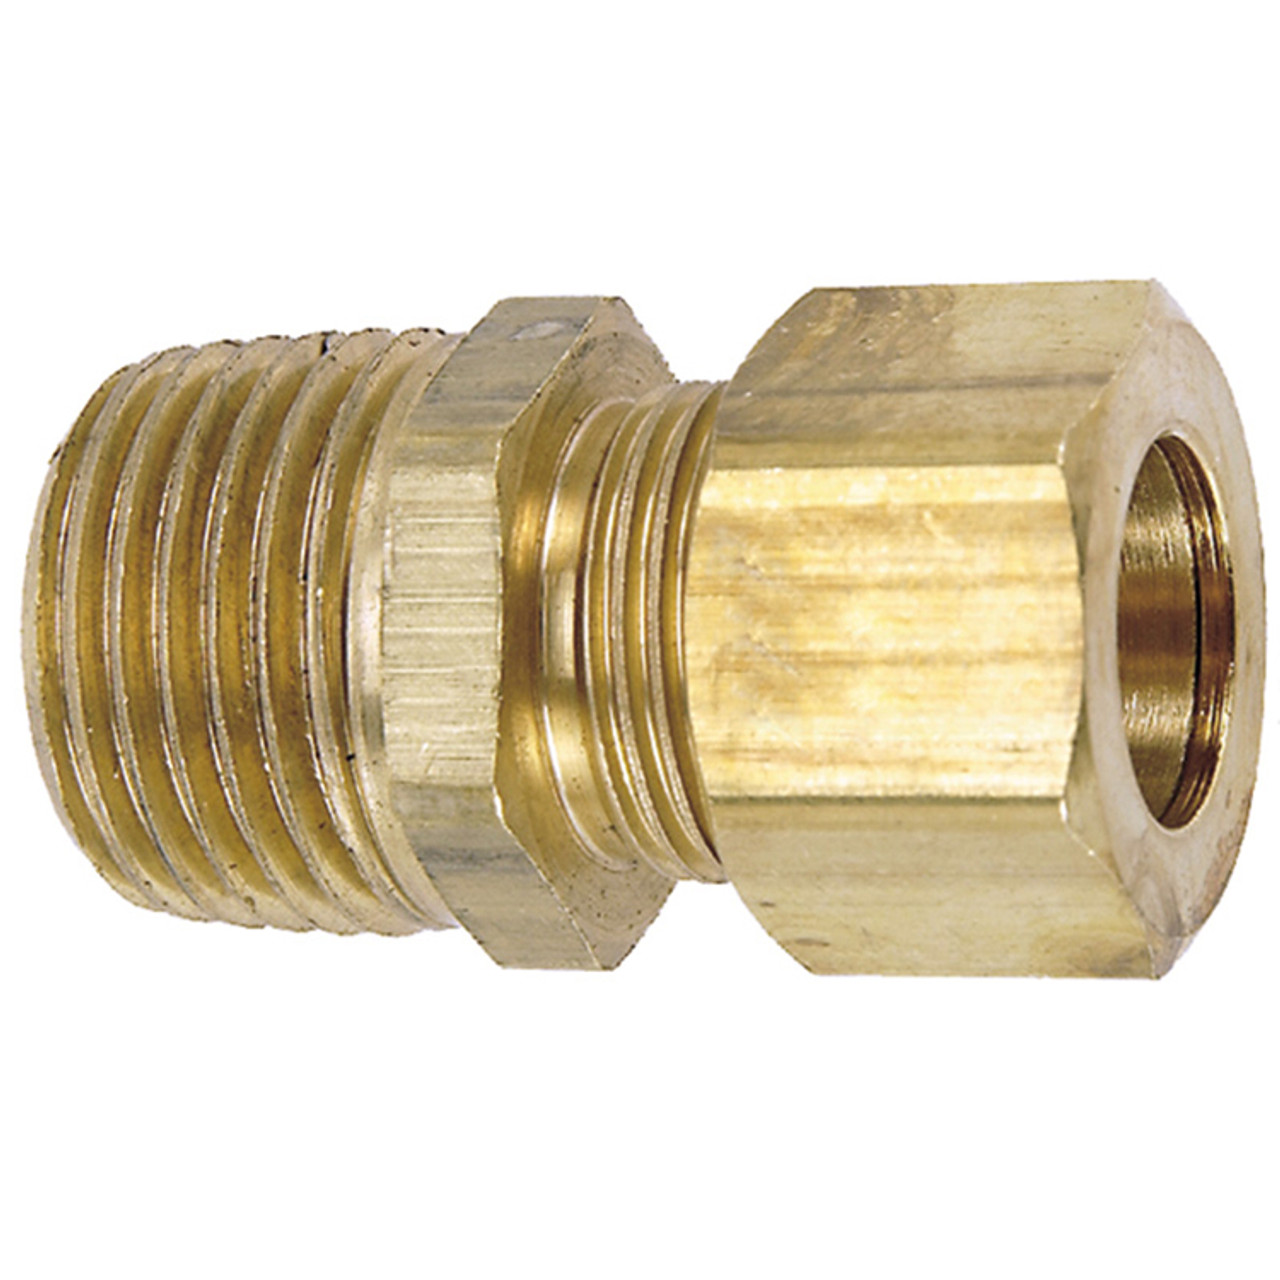 3/8 x 1/2" Brass Male NPT - Compression Connector   G6016-06-08